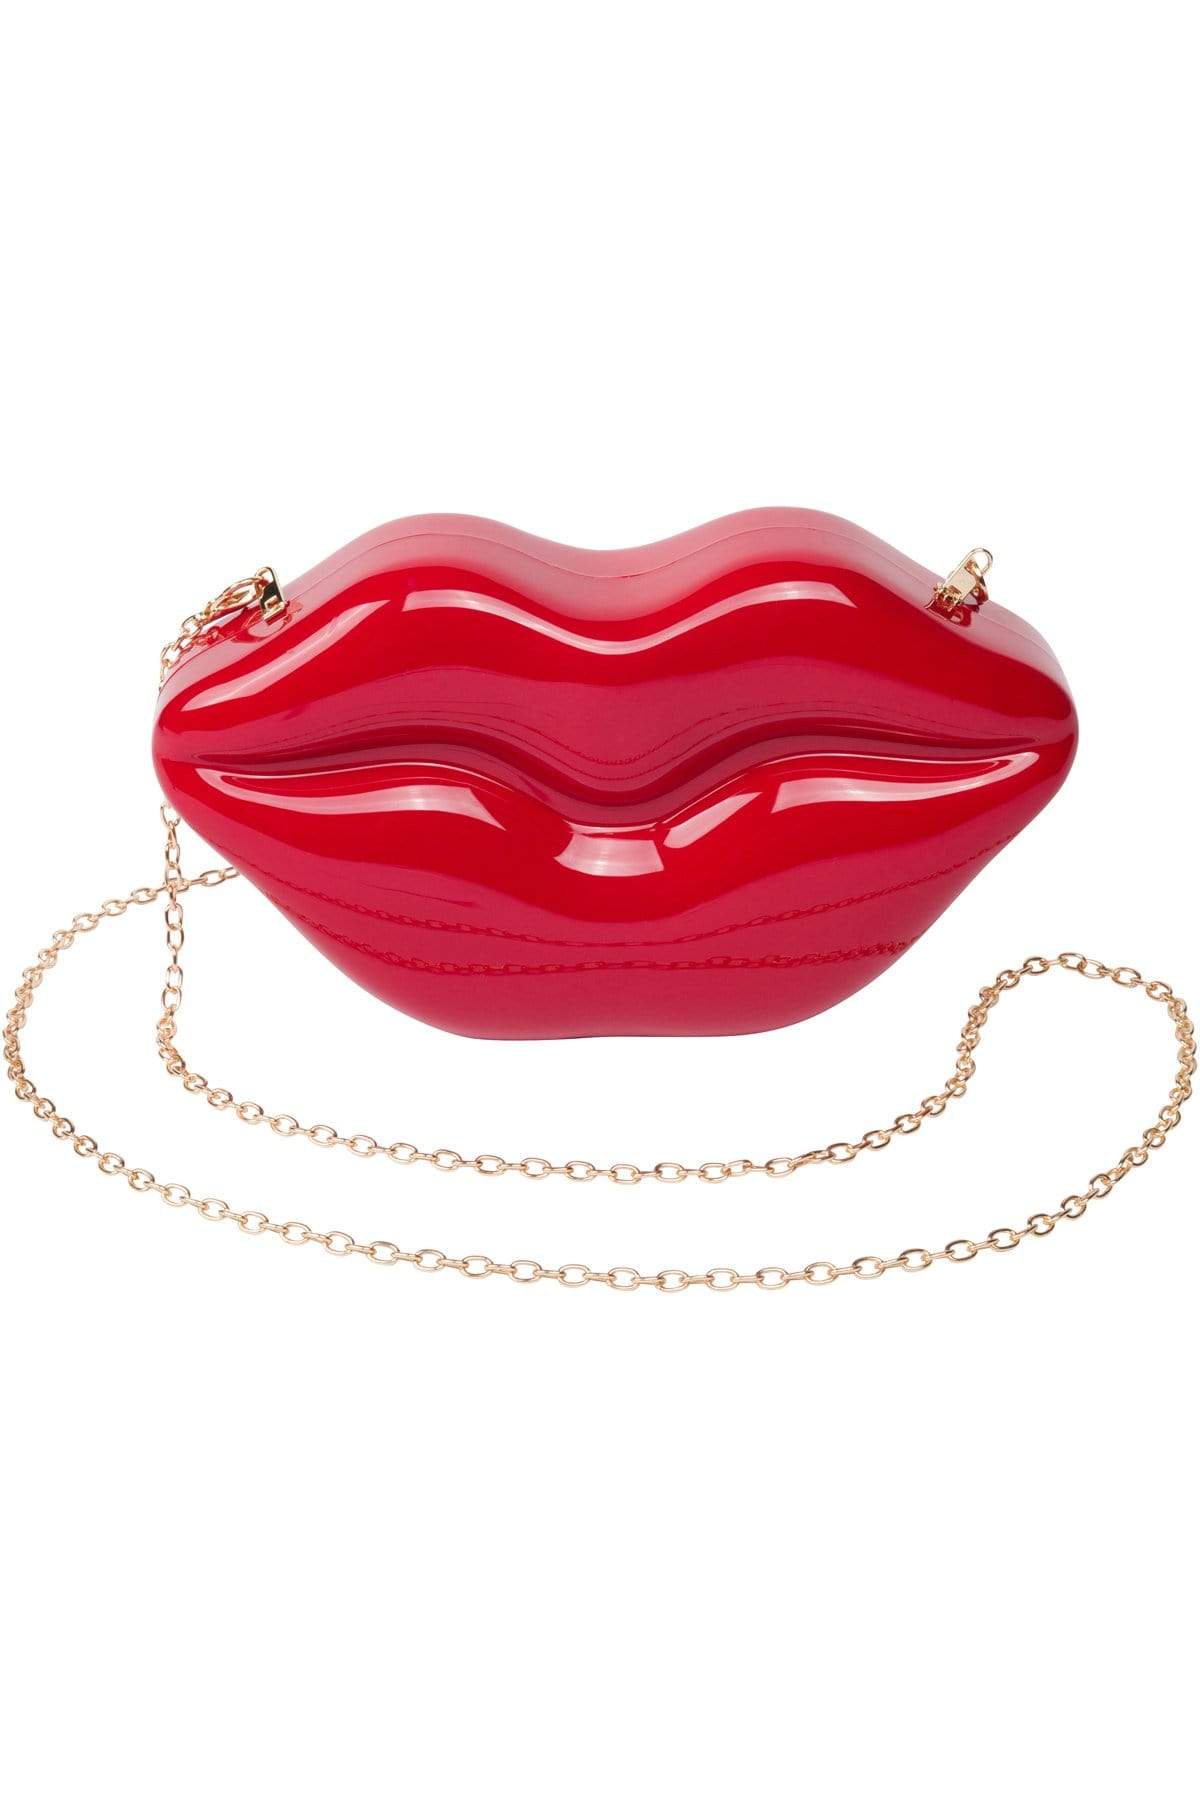 Lulu Guinness Women's Large Lip Coin Purse - Neon Pink | Coggles